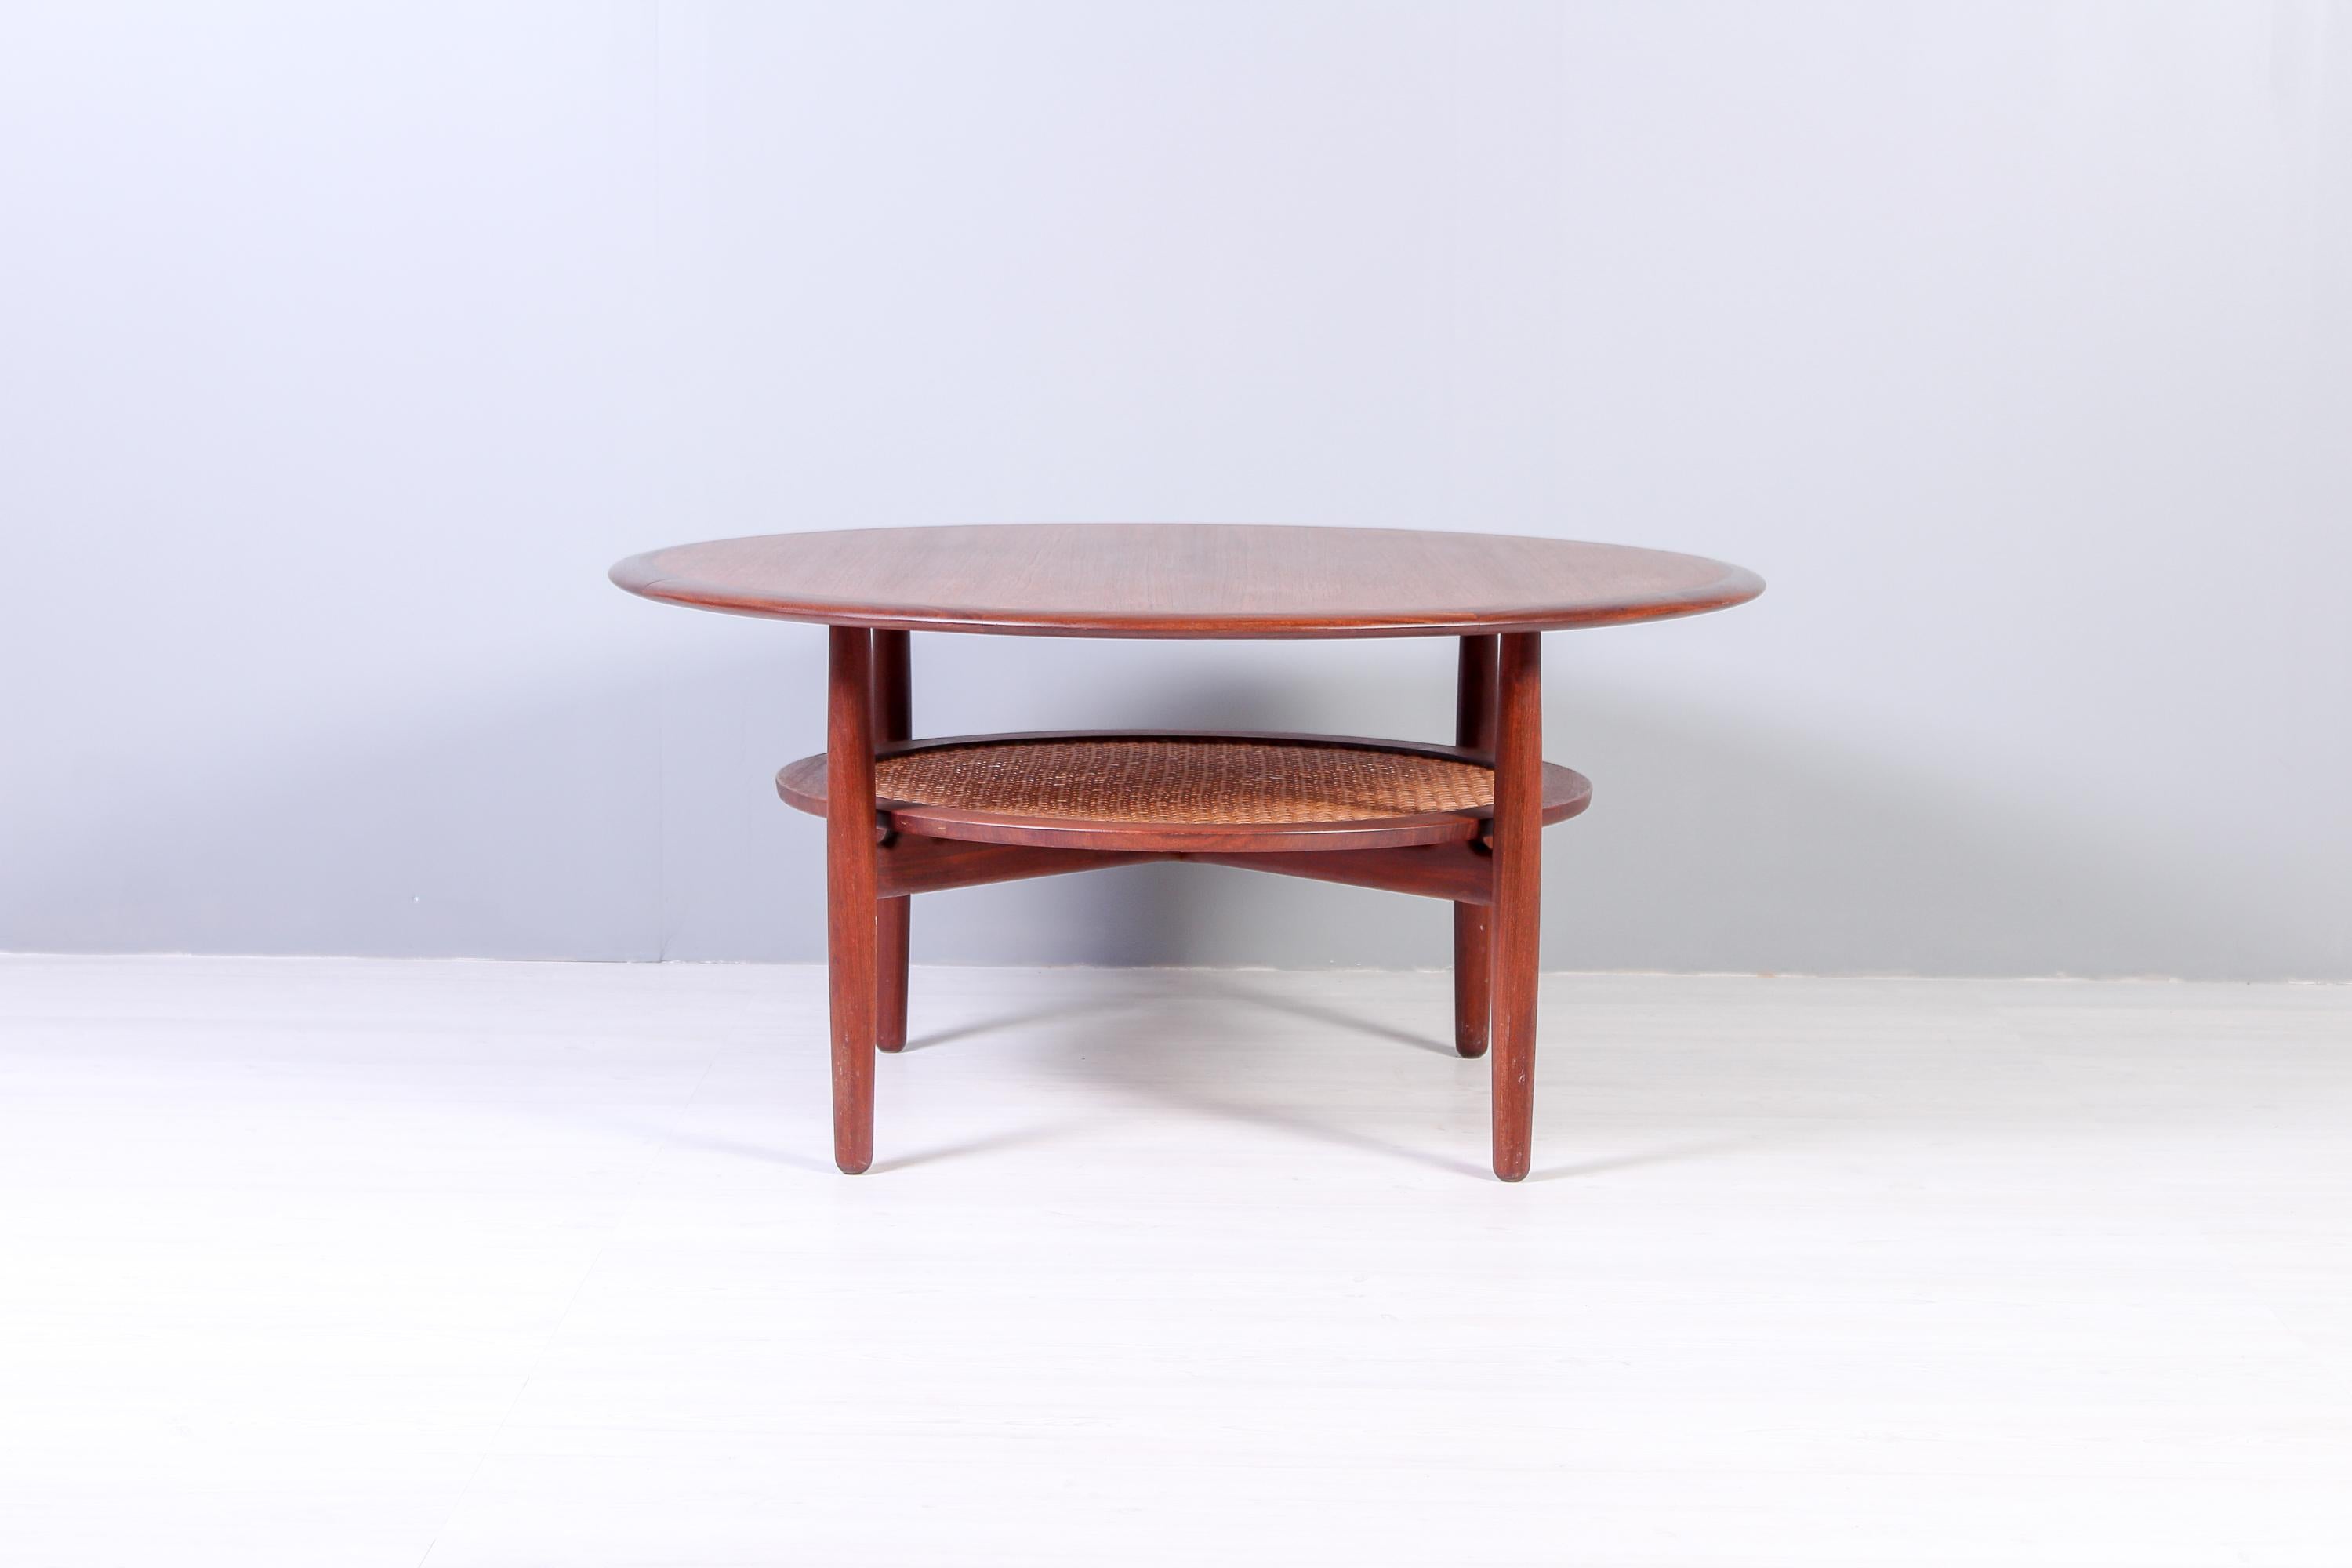 A round Danish coffee table produced in the 1950s. The table is made out of teak with a cane shelf. Very decorative and high quality. 

Very good vintage condition with refinished top and only few small breakage on cane.